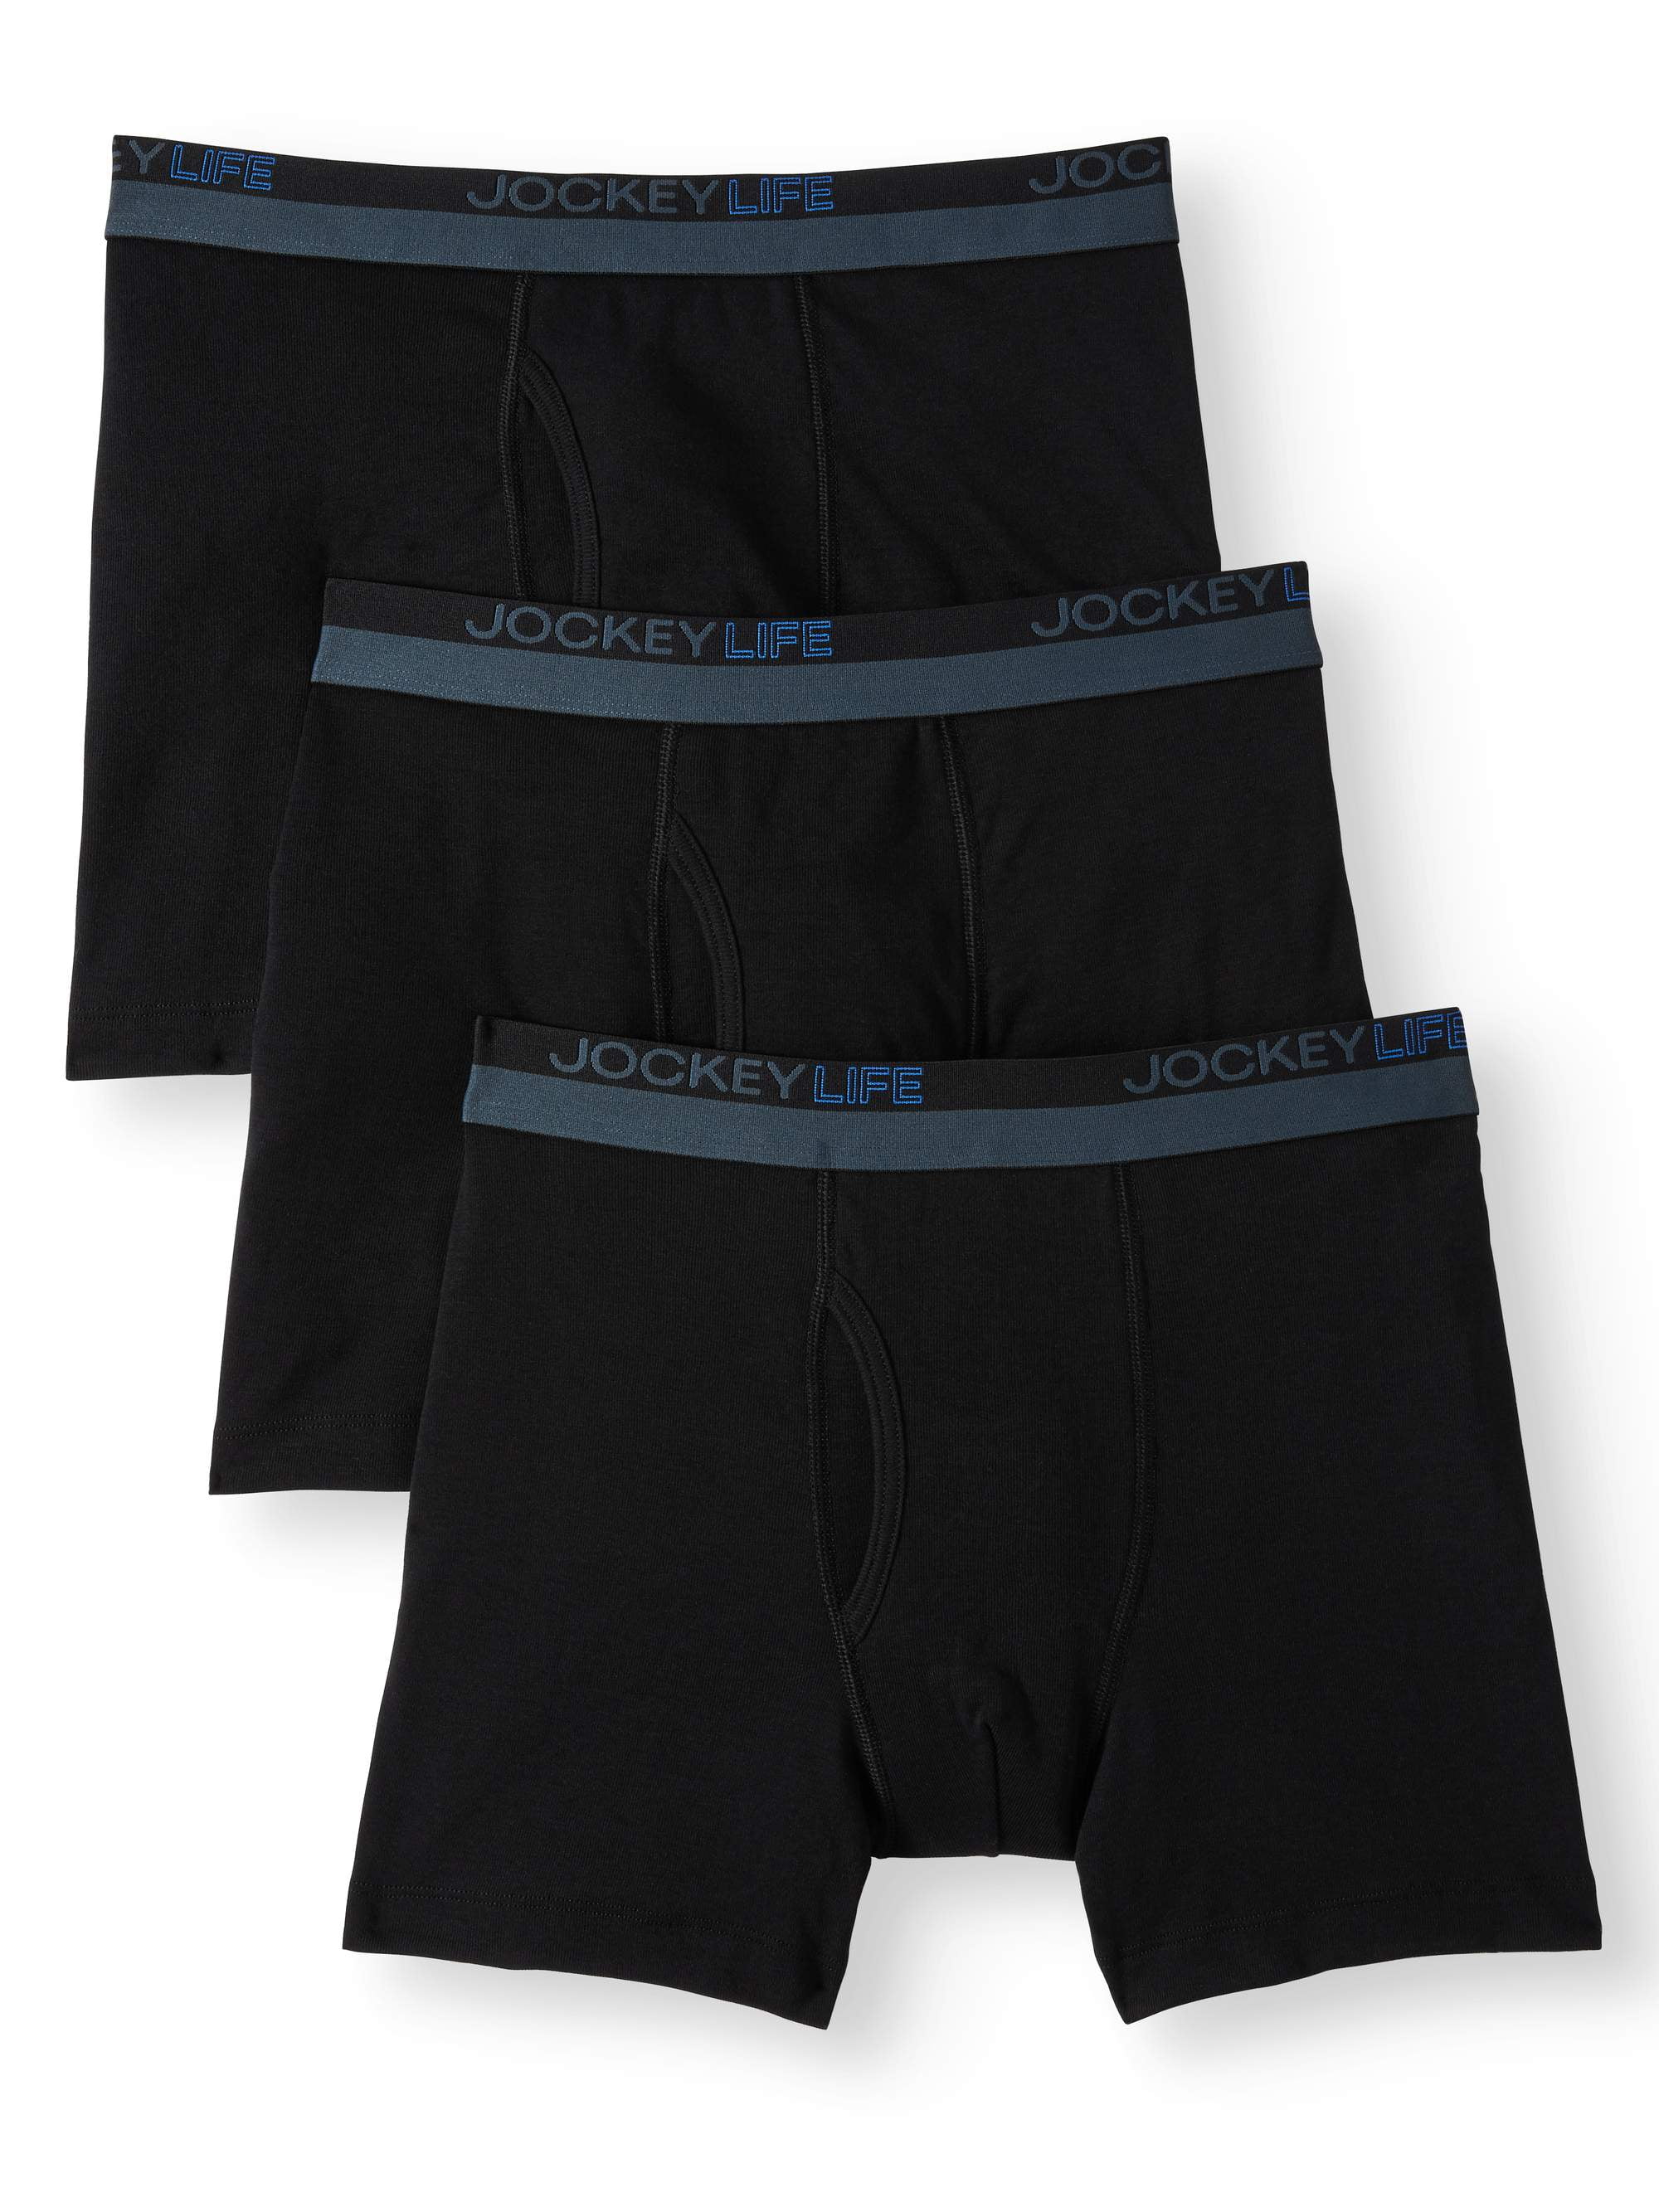 Wholesale Jockey Life Boxer Briefs Products at Factory Prices from  Manufacturers in China, India, Korea, etc.